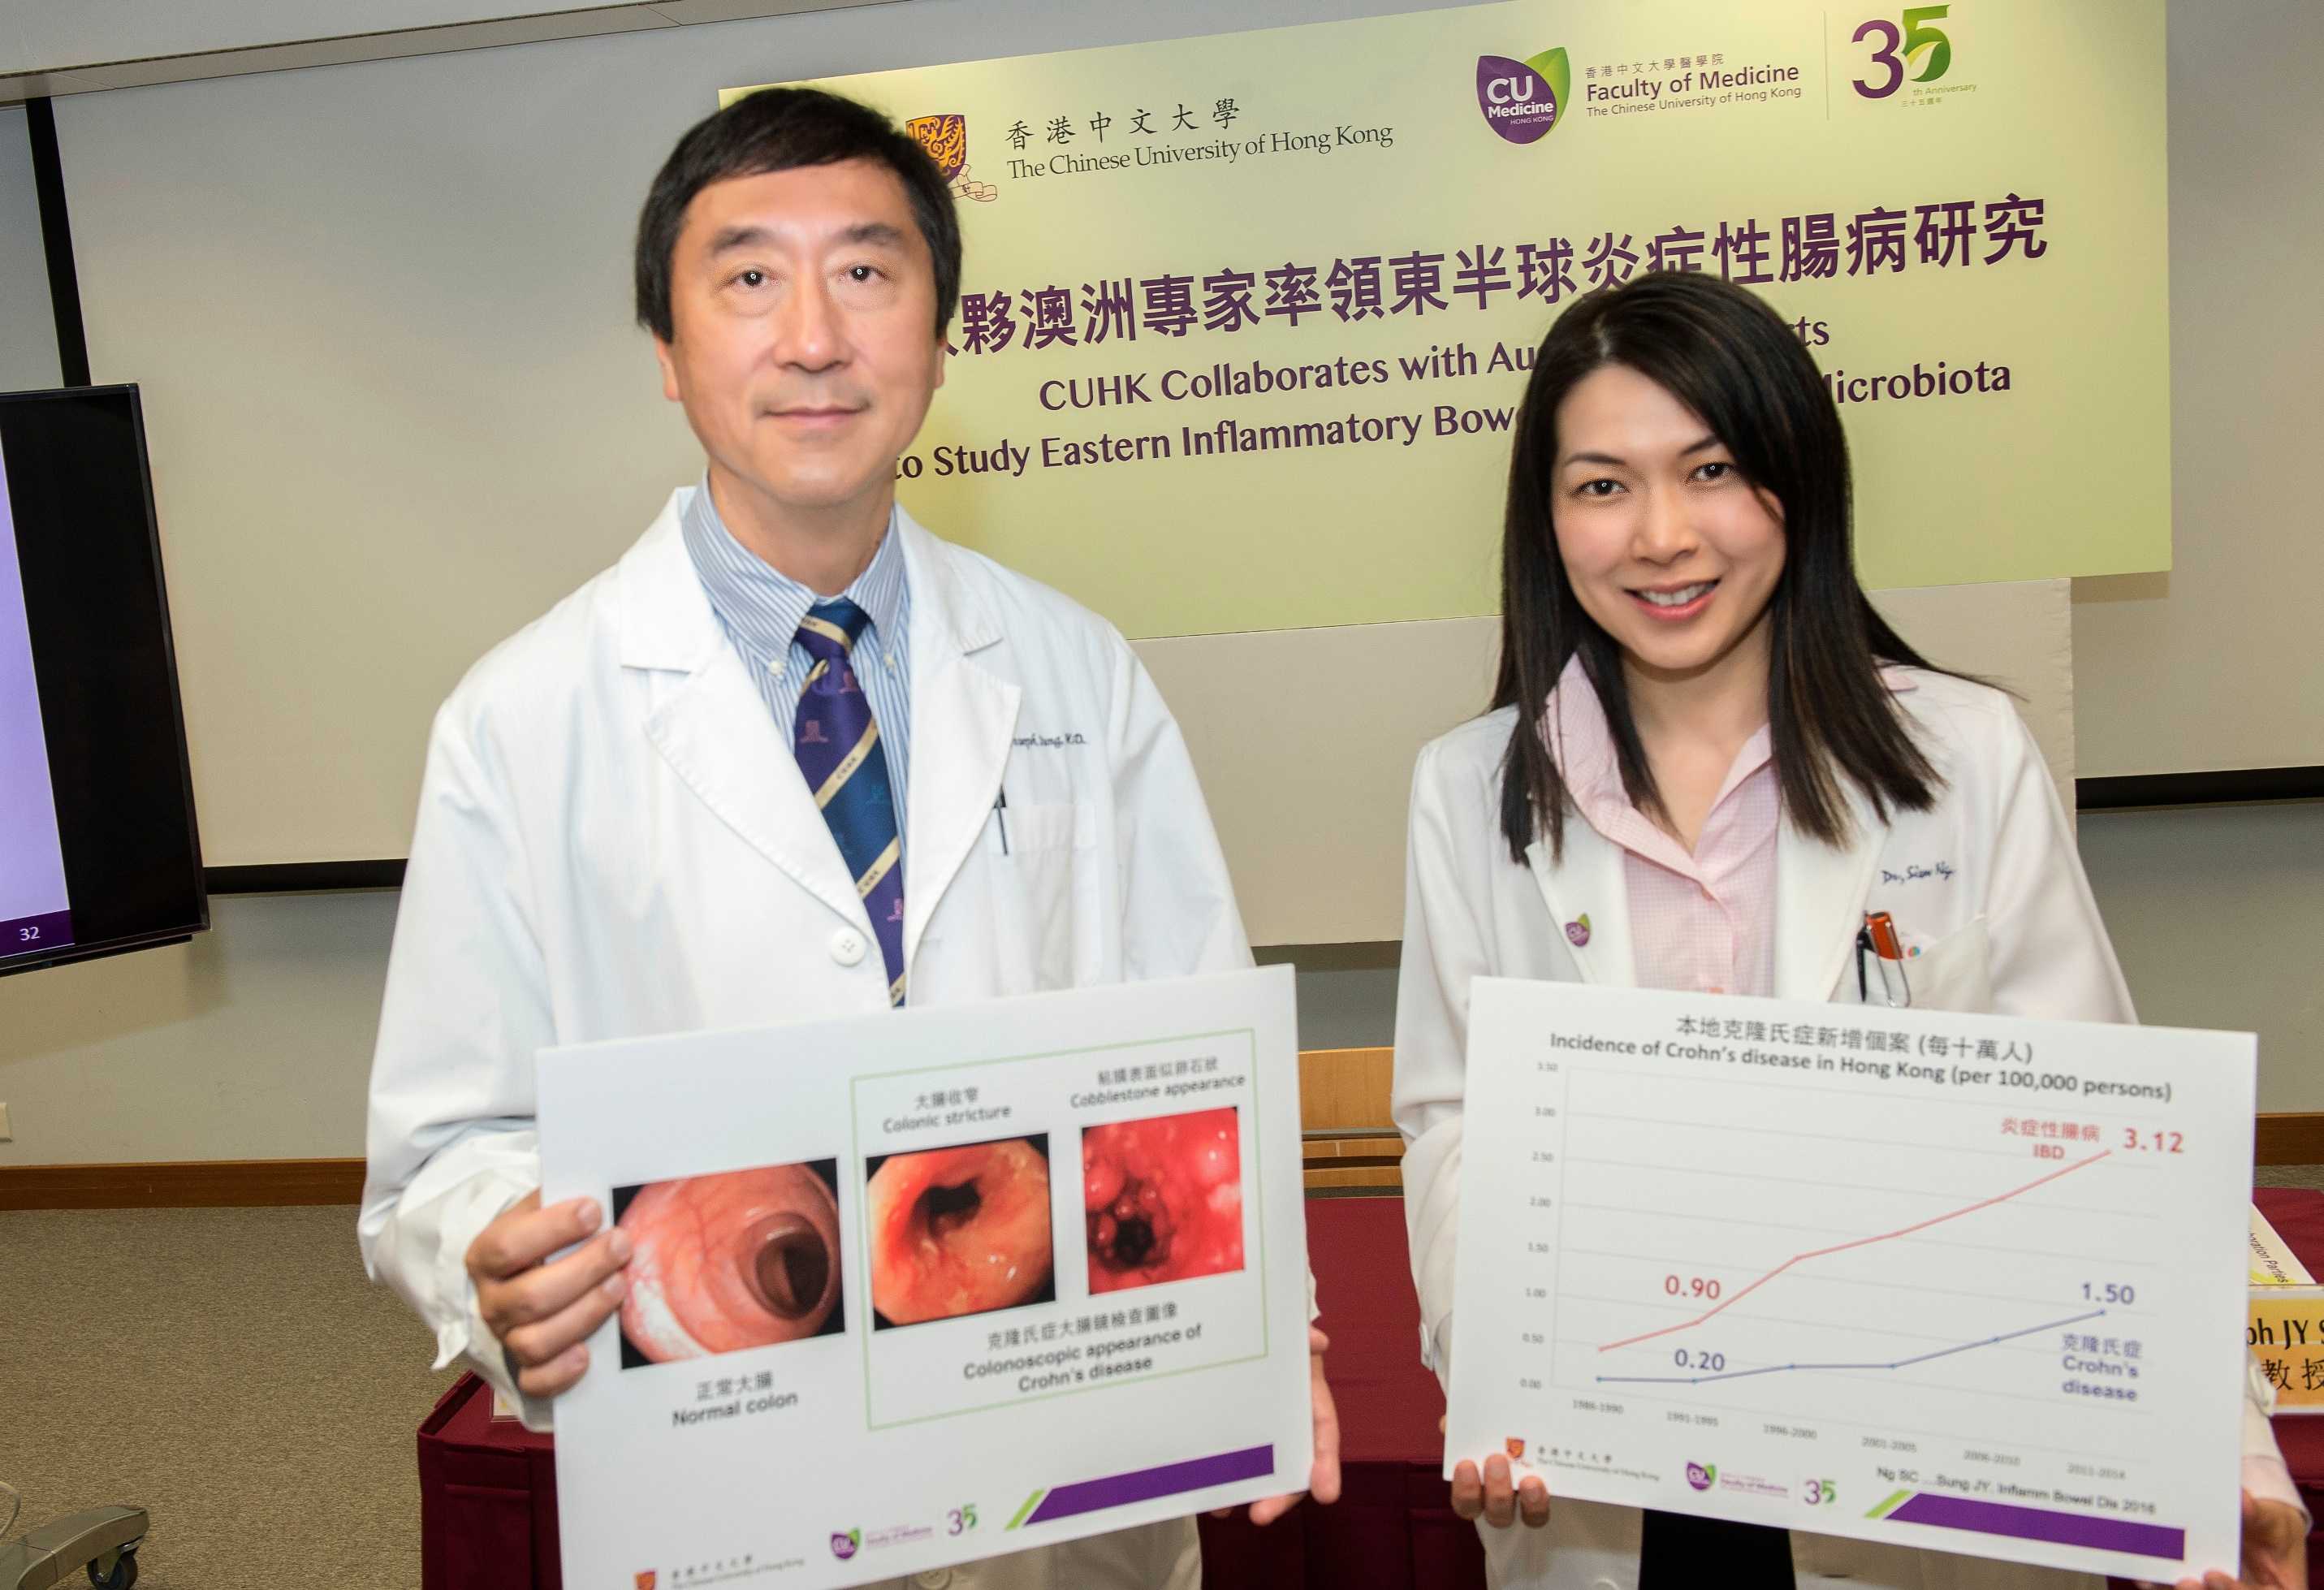 Prof. Joseph J.Y. SUNG, Vice-Chancellor and President and Mok Hing Yiu Professor of Medicine of CUHK (left) and Prof. Siew Chien NG, Department of Medicine and Therapeutics, Faculty of Medicine at CUHK, elaborate details of the ENIGMA Studies which aims to look into the association between Crohn's disease and patients’ gut microbiota and dietary habits.